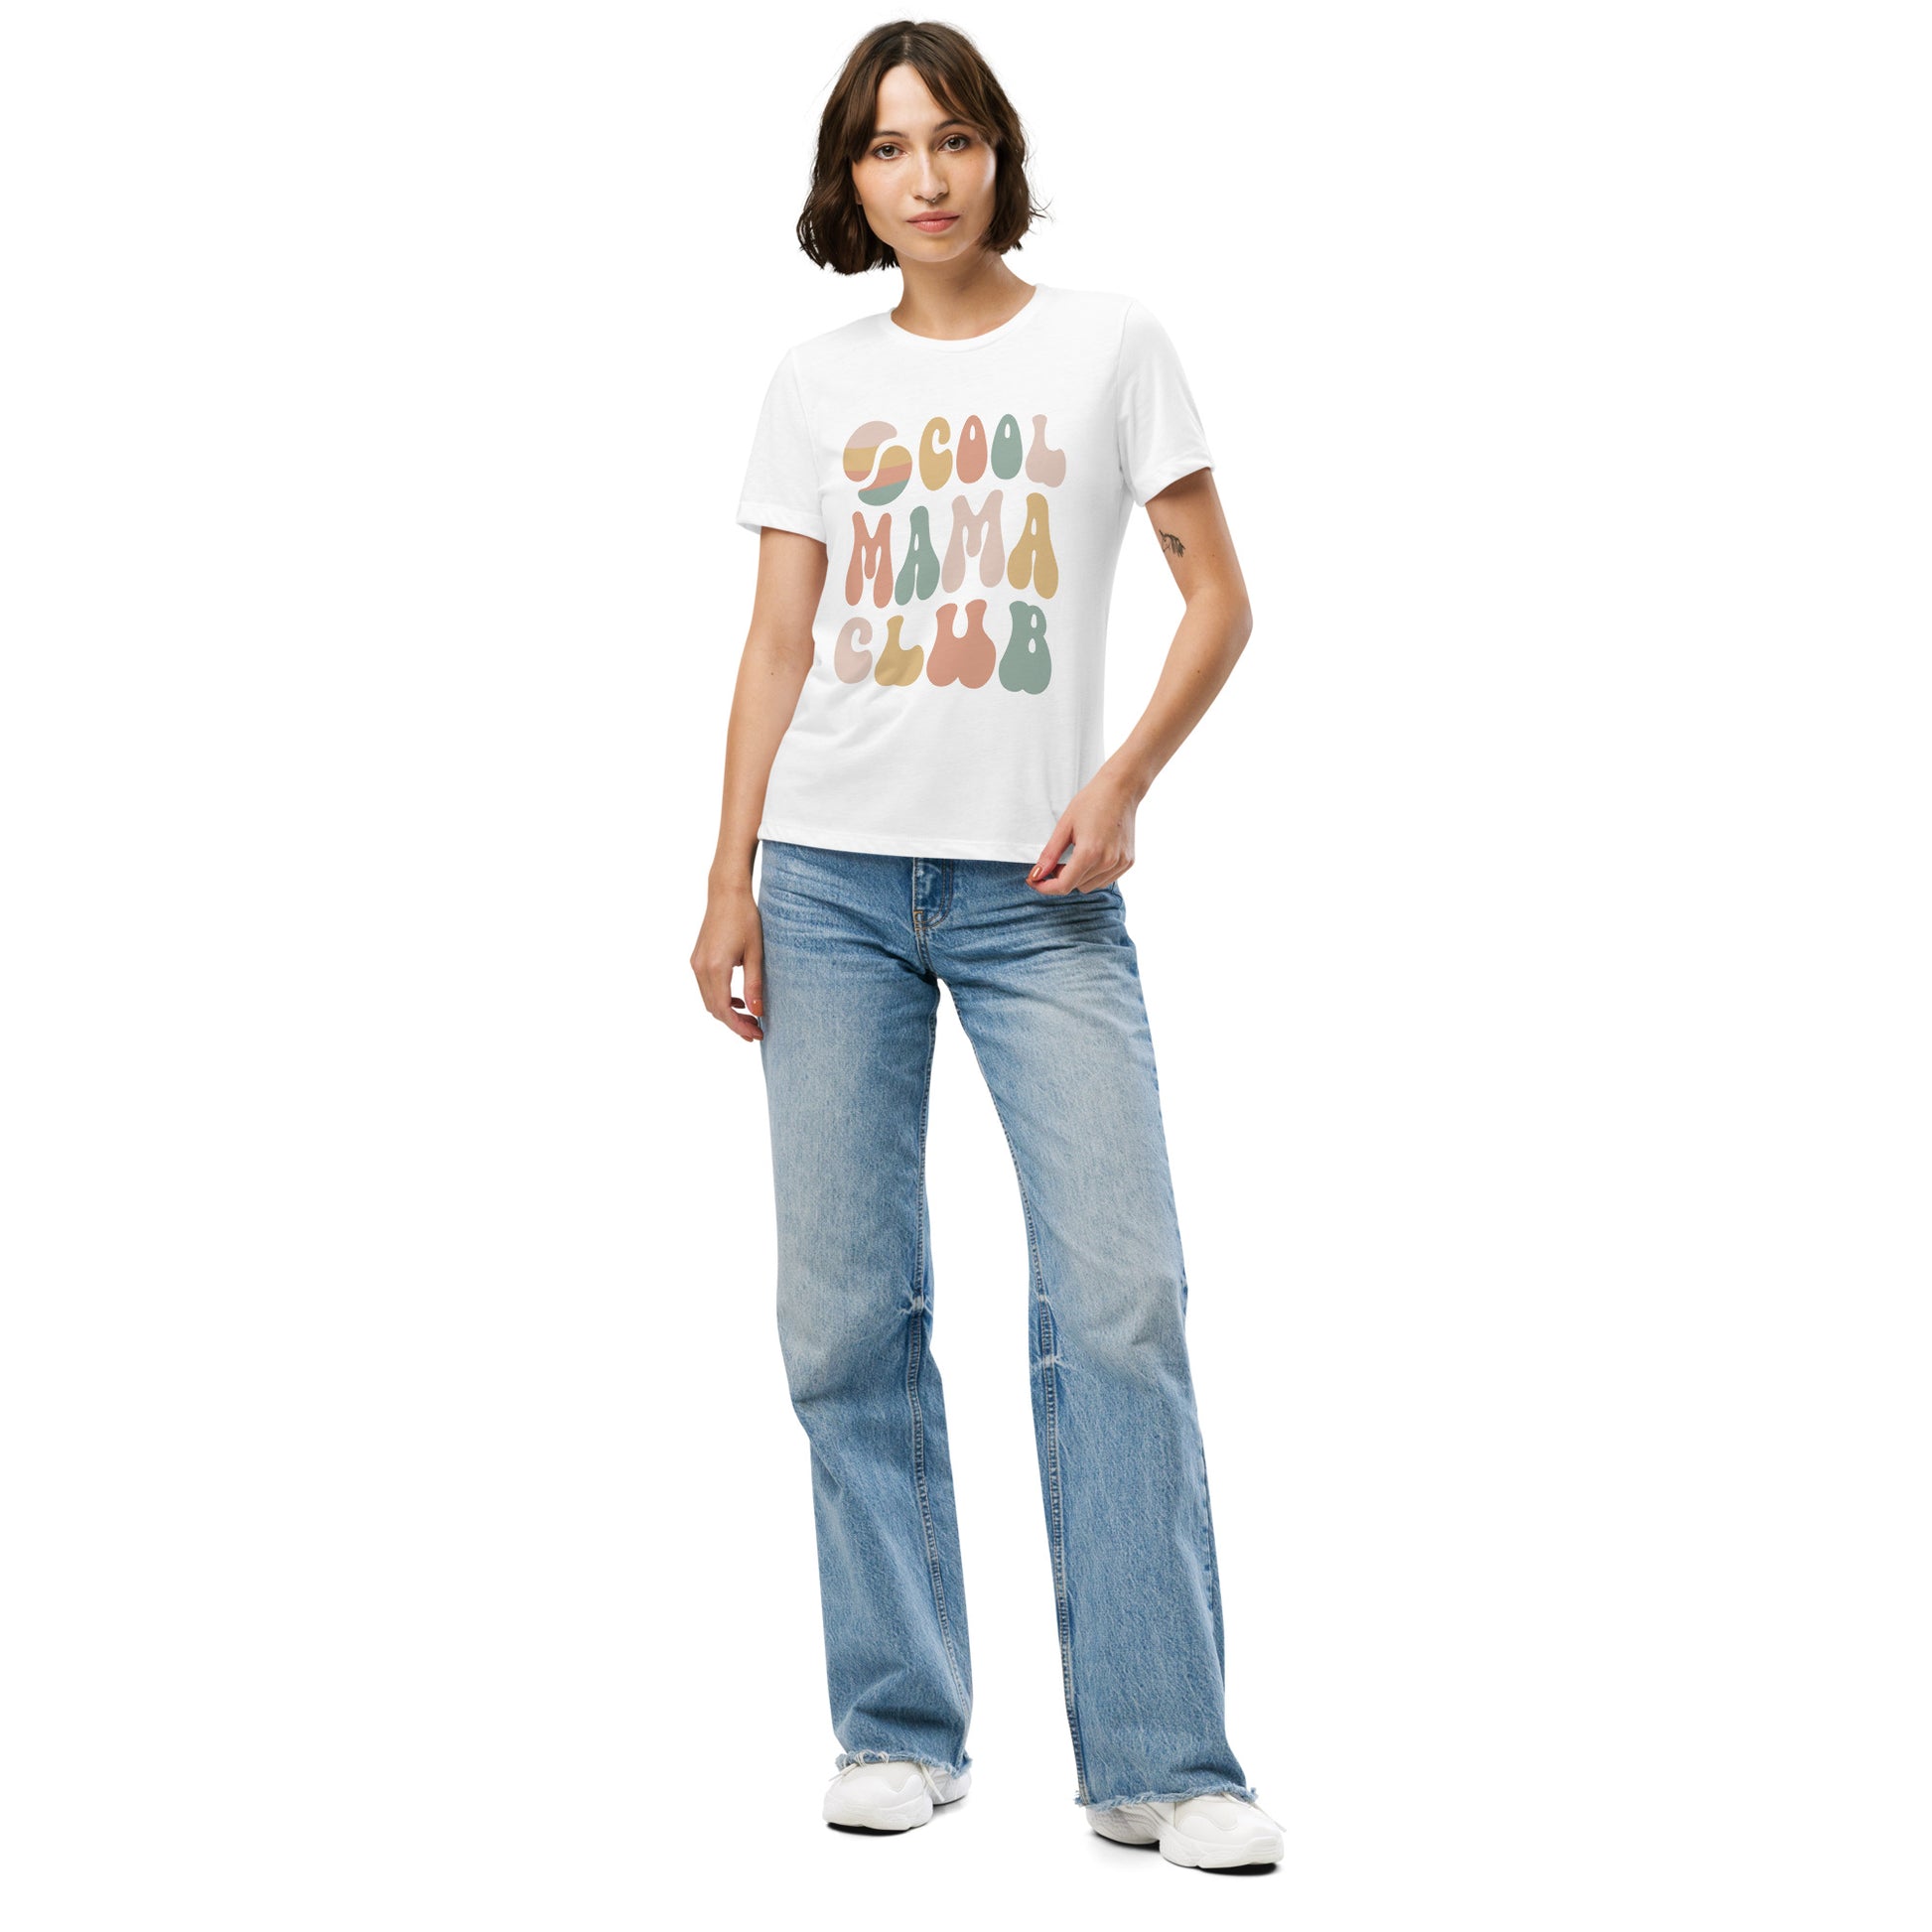 Cool Mama Club Tee Solid White Triblend